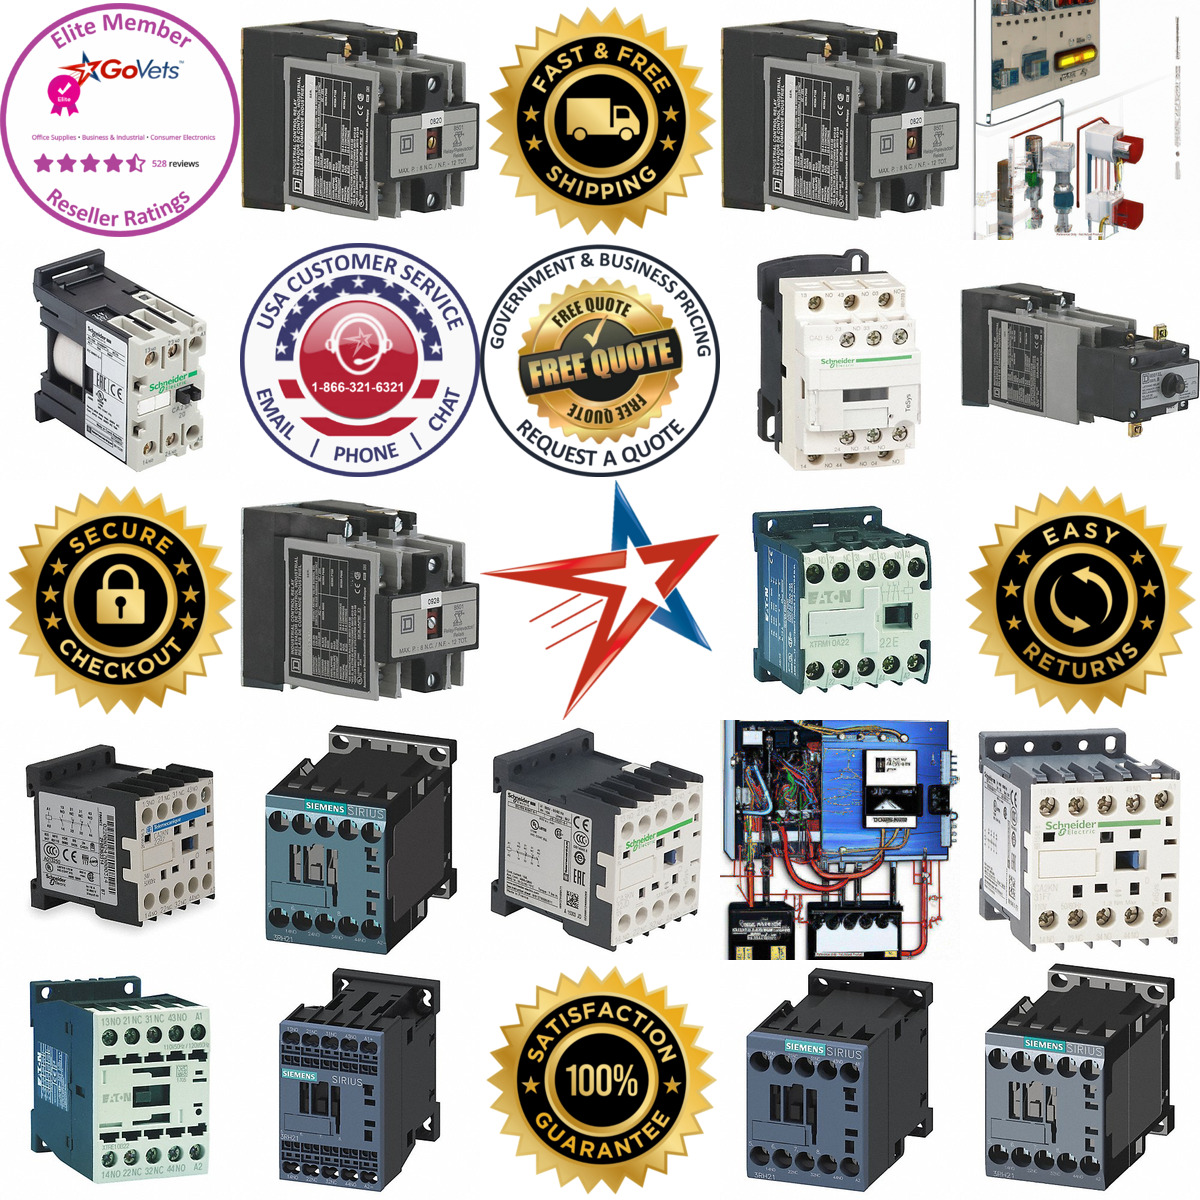 A selection of Iec and Nema Style Relays products on GoVets